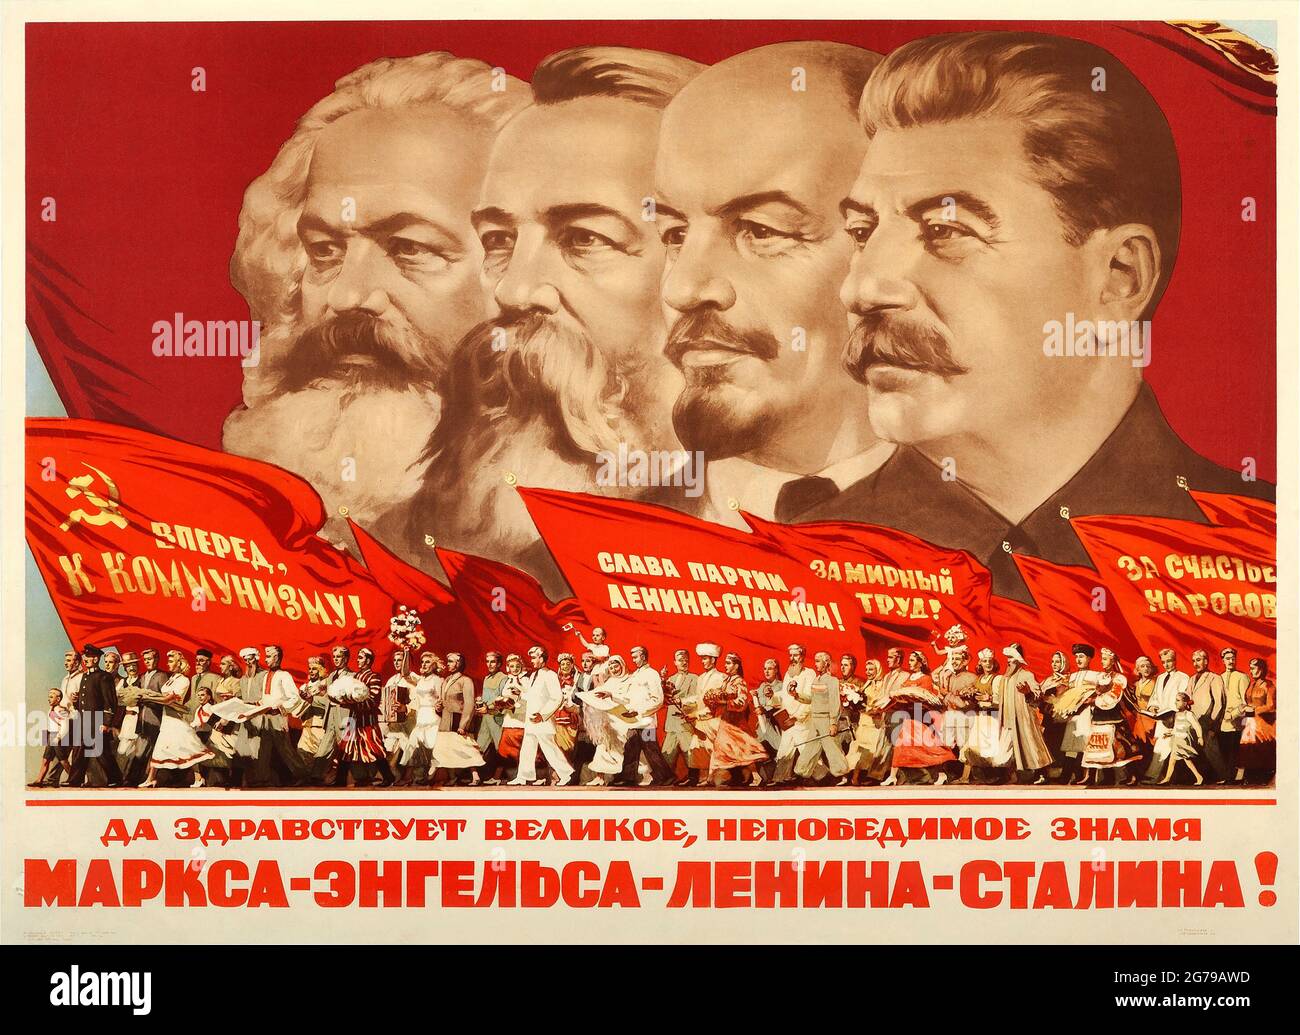 Long Live the Great Invincible Banner of Marx, Engels, Lenin and Stalin!. Museum: PRIVATE COLLECTION. Author: A. Kossov. Stock Photo